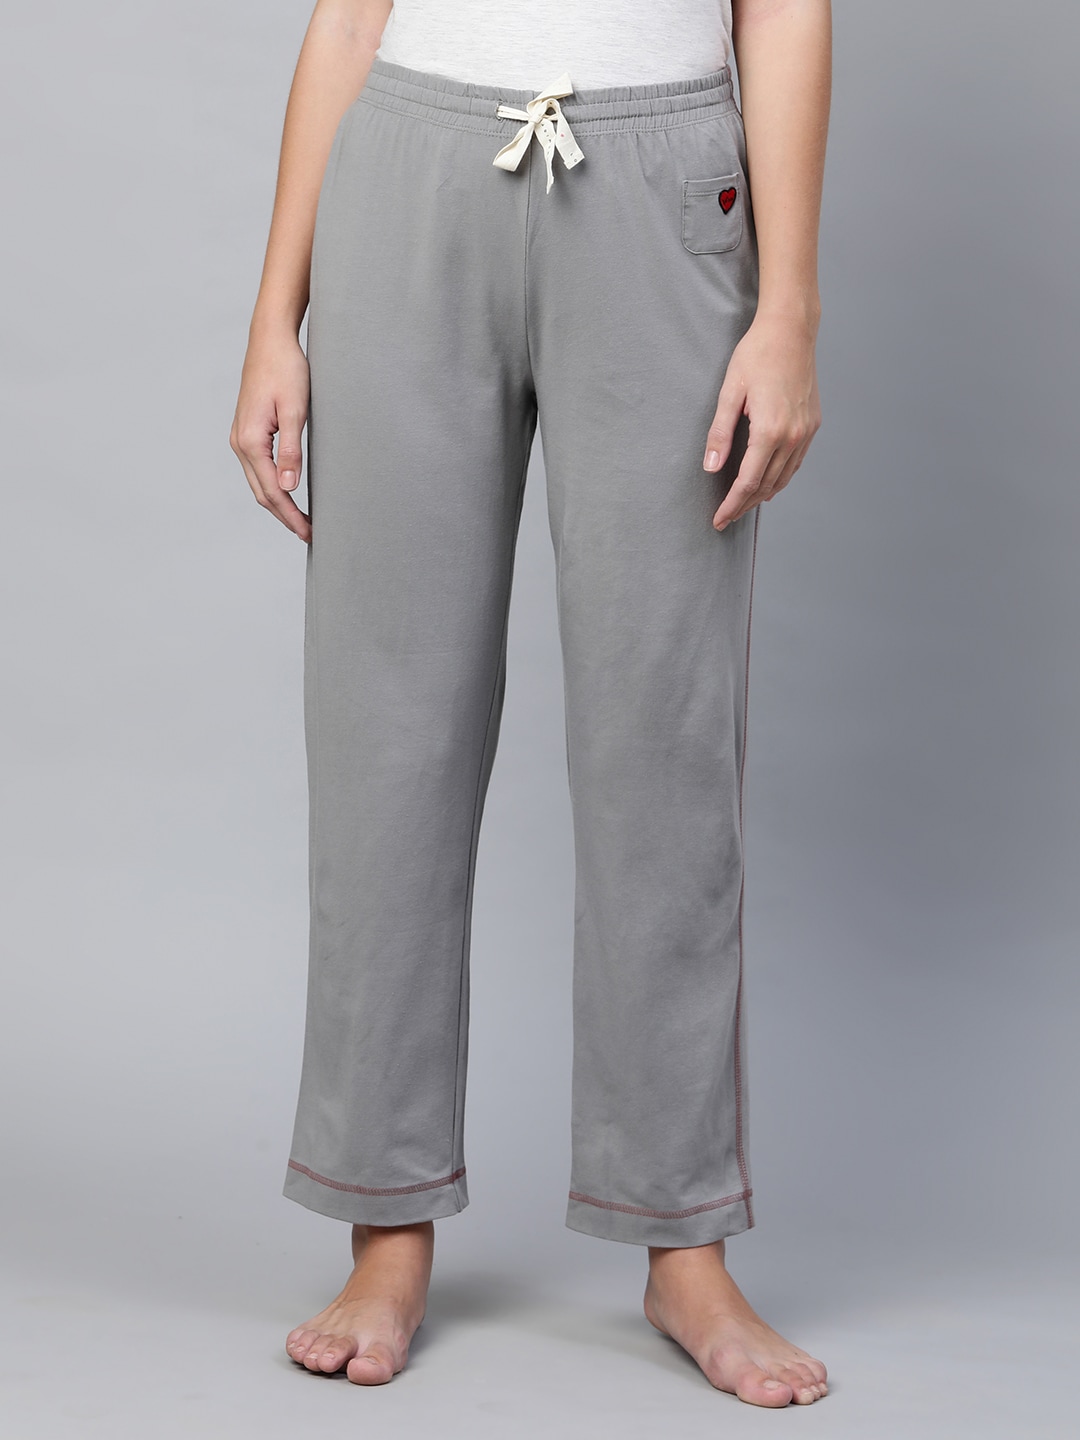 Chemistry Womens Grey Cotton Solid Pyjamas Price in India